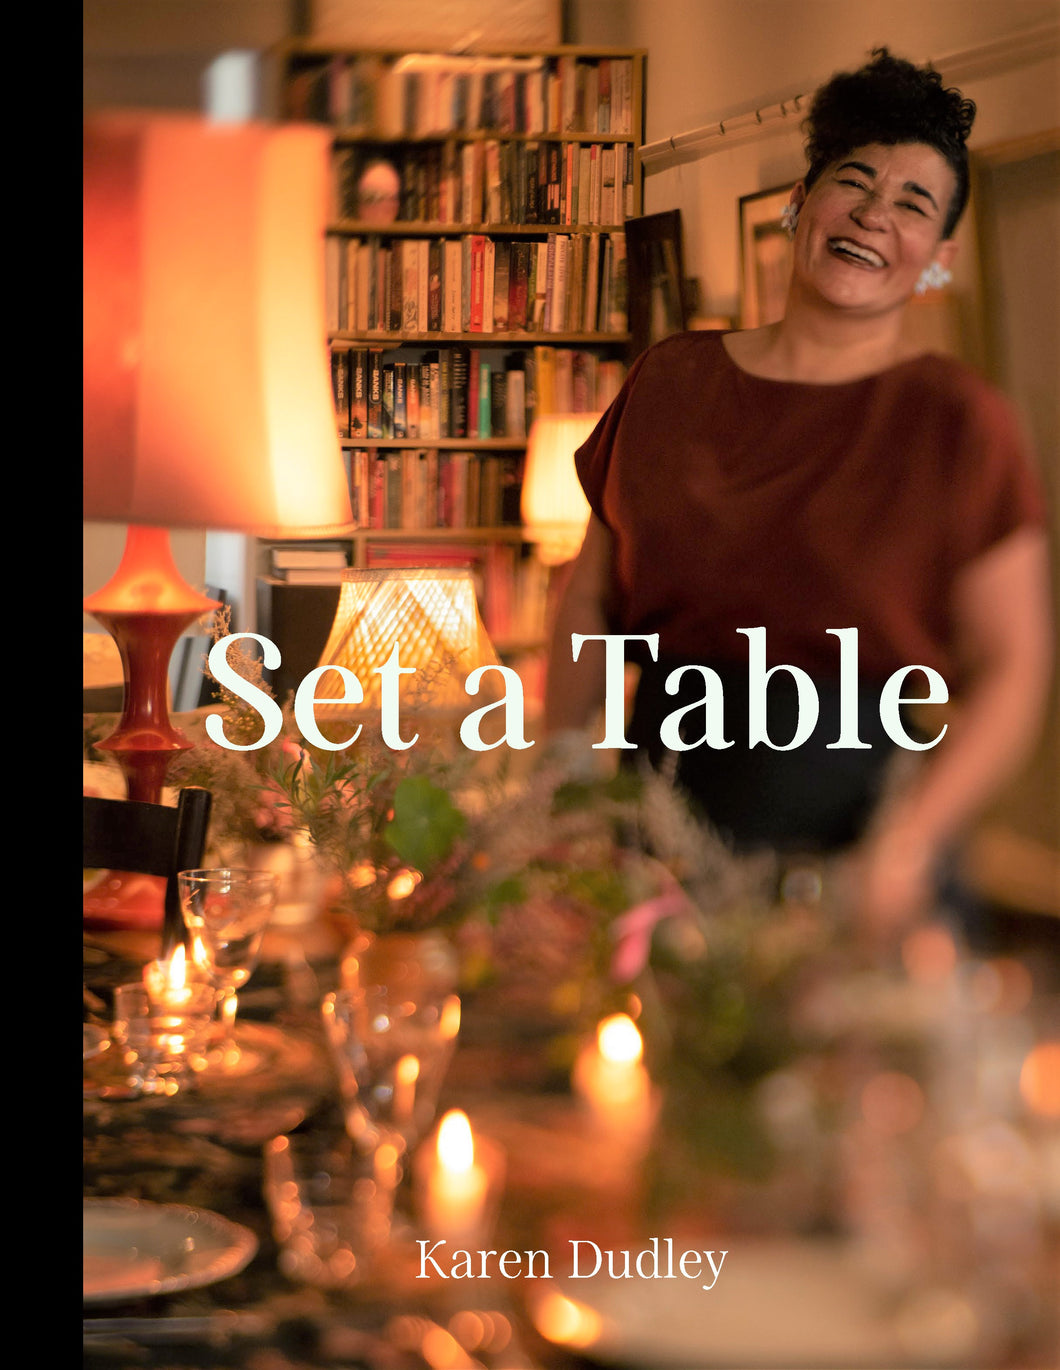 Set a Table by Karen Dudley